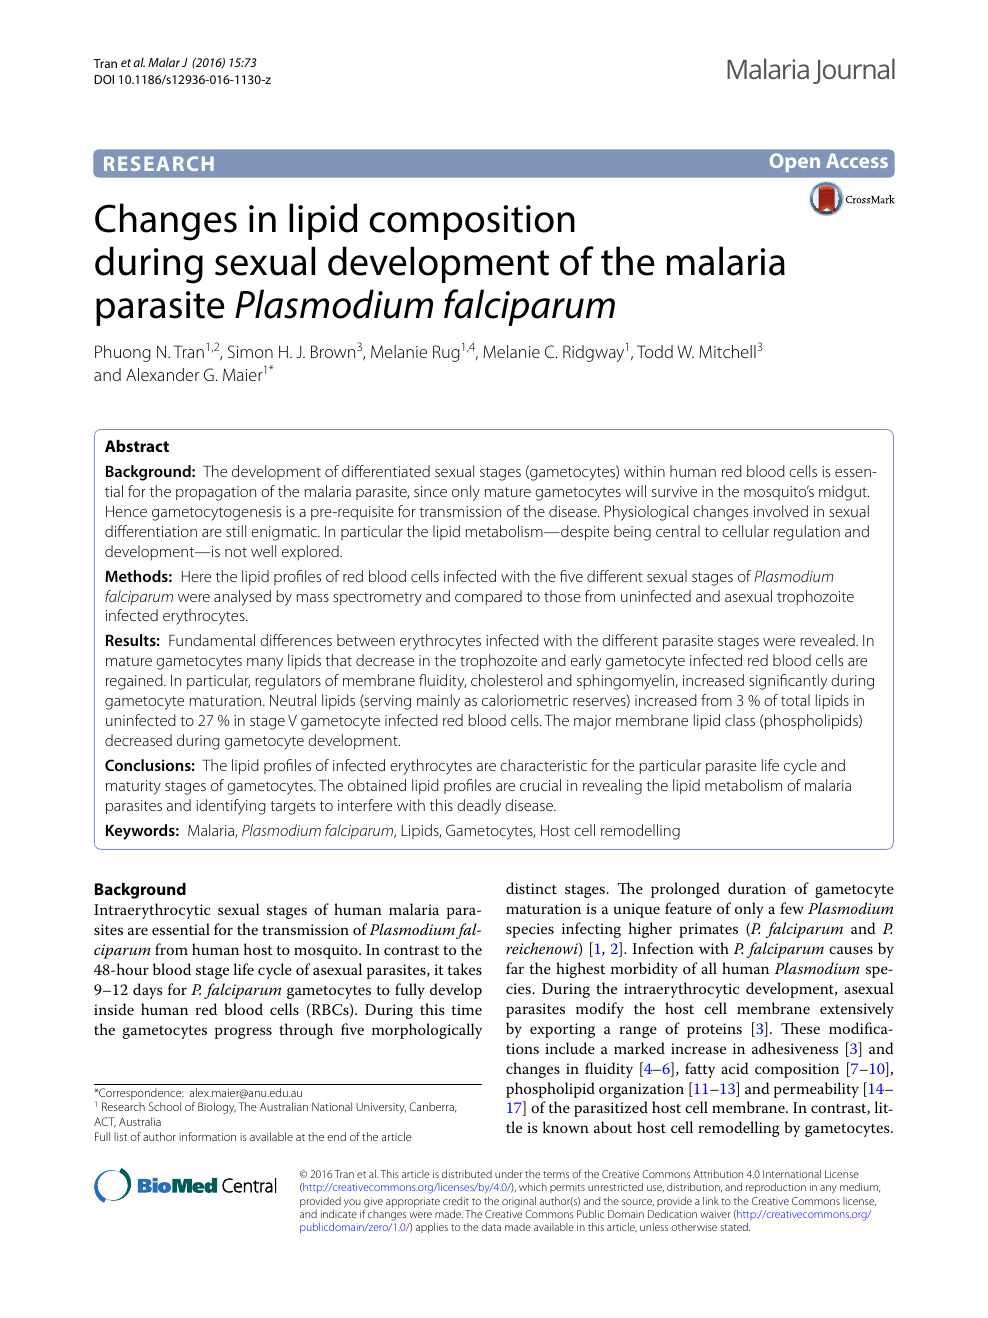 Changes In Lipid Composition During Sexual Development Of The Malaria Parasite Plasmodium Falciparum Topic Of Research Paper In Biological Sciences Download Scholarly Article Pdf And Read For Free On Cyberleninka Open